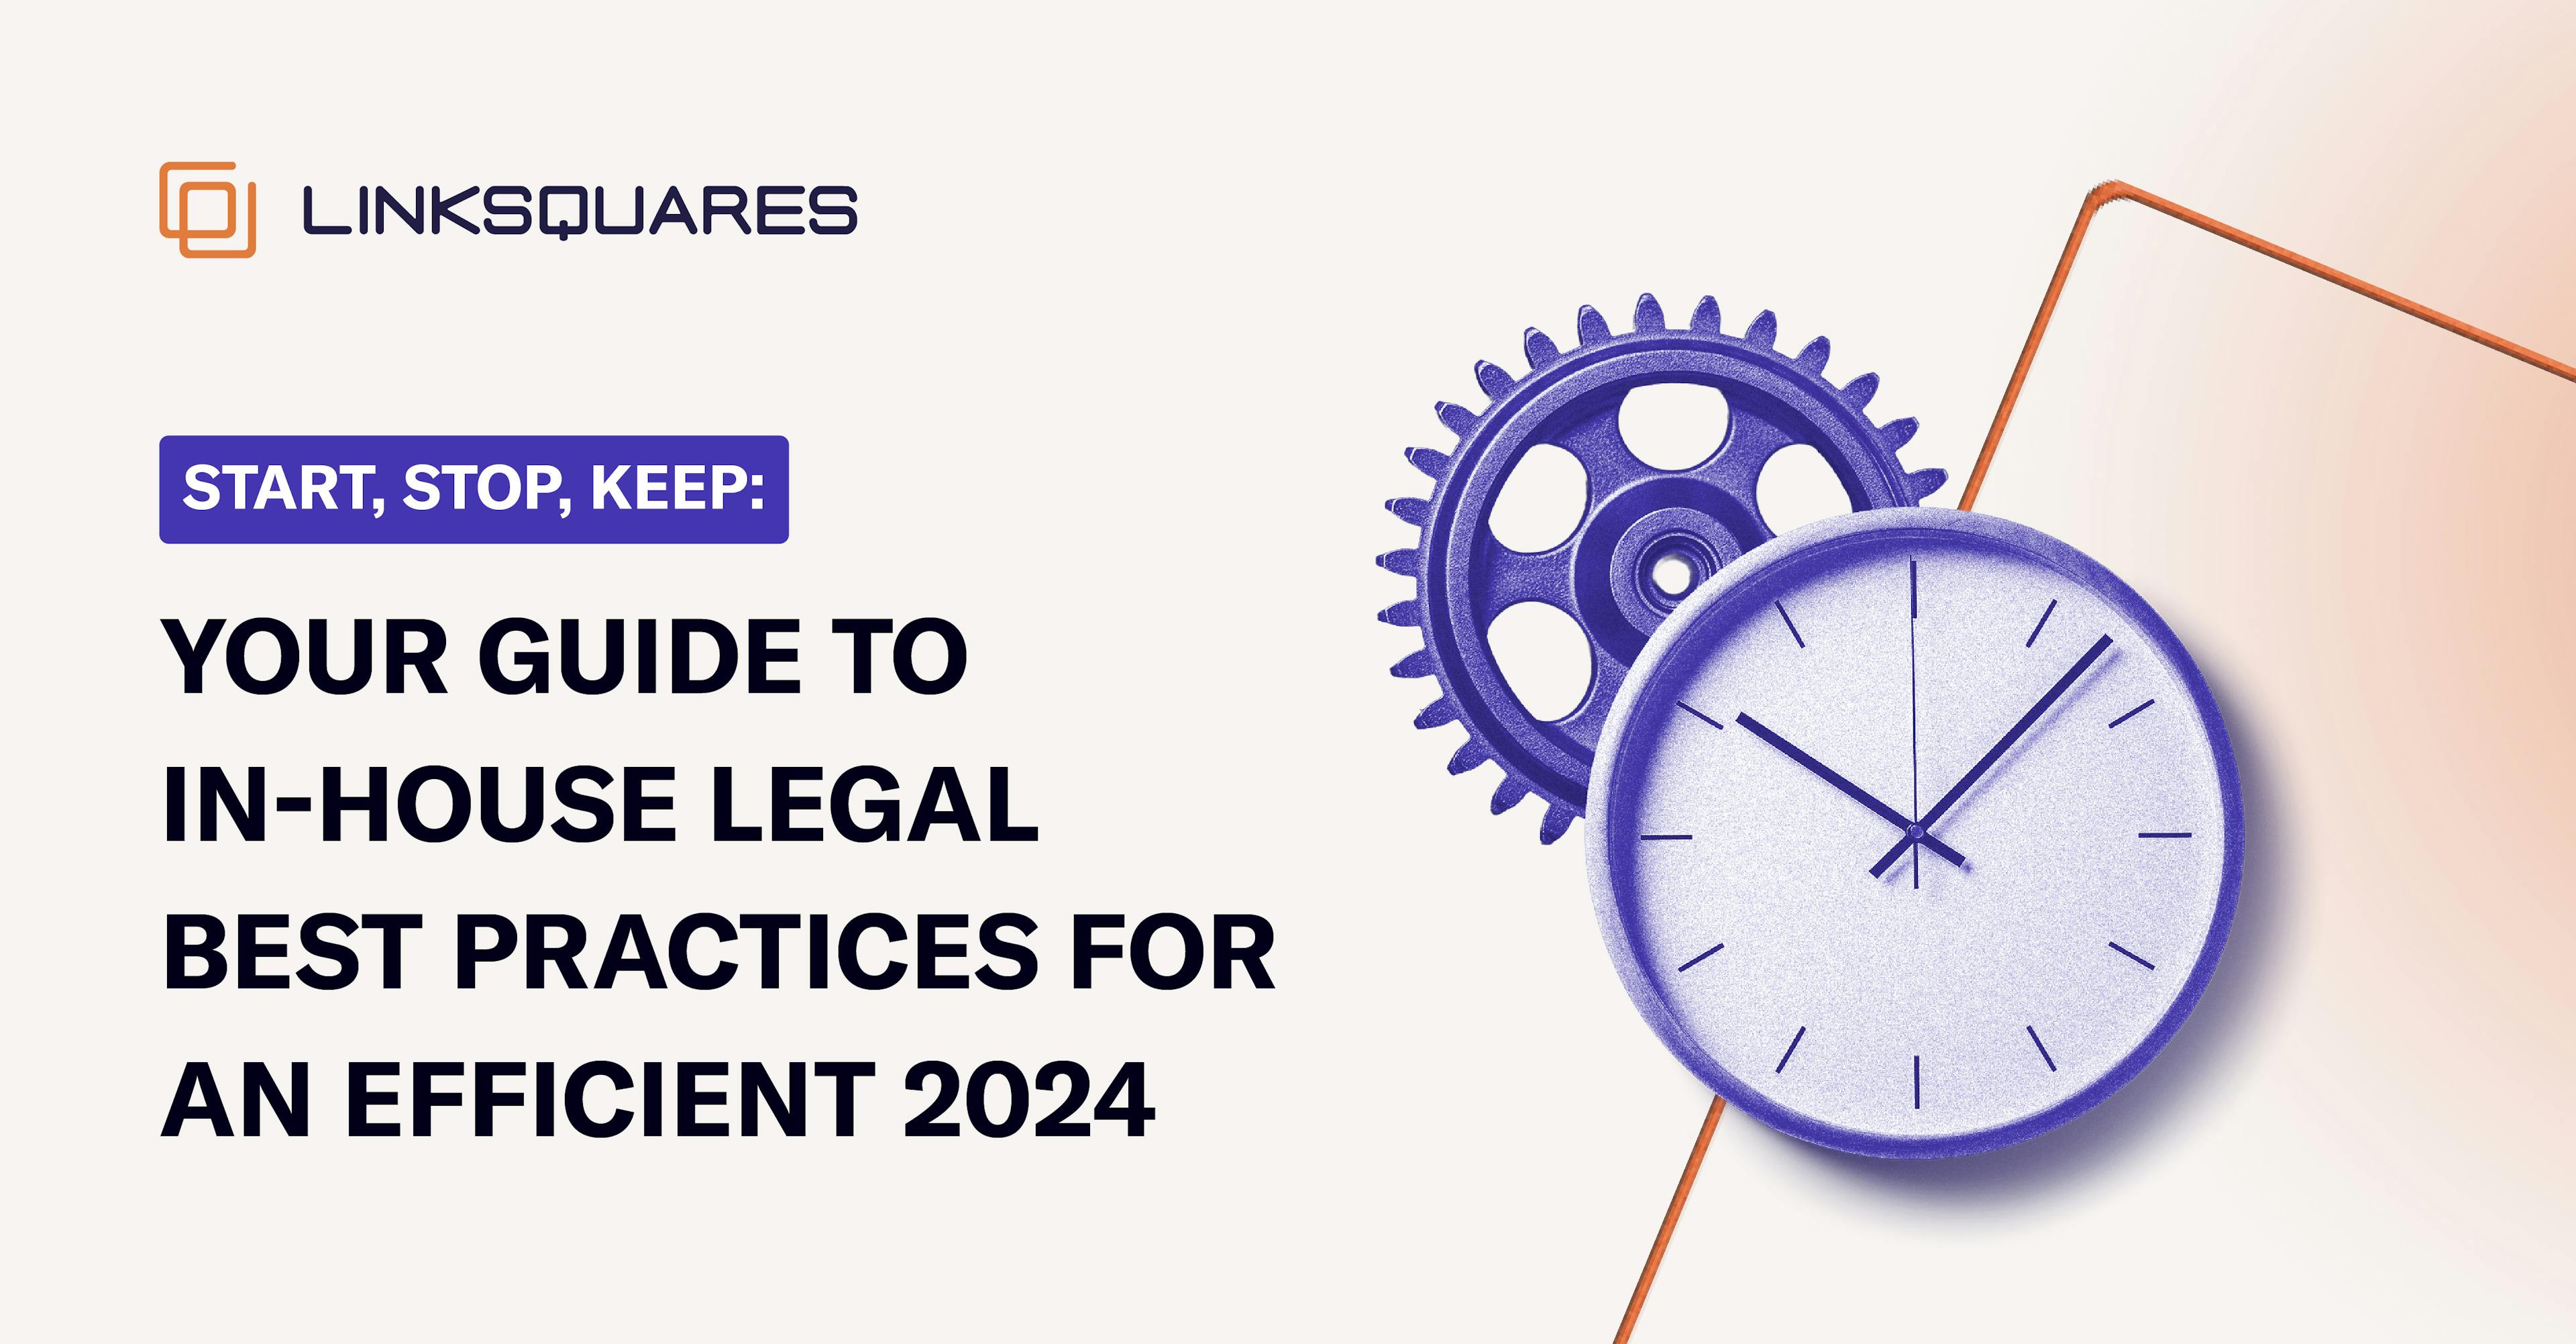 Start, Stop, Keep: Your Guide to In-House Legal Best Practices for an Efficient 2024